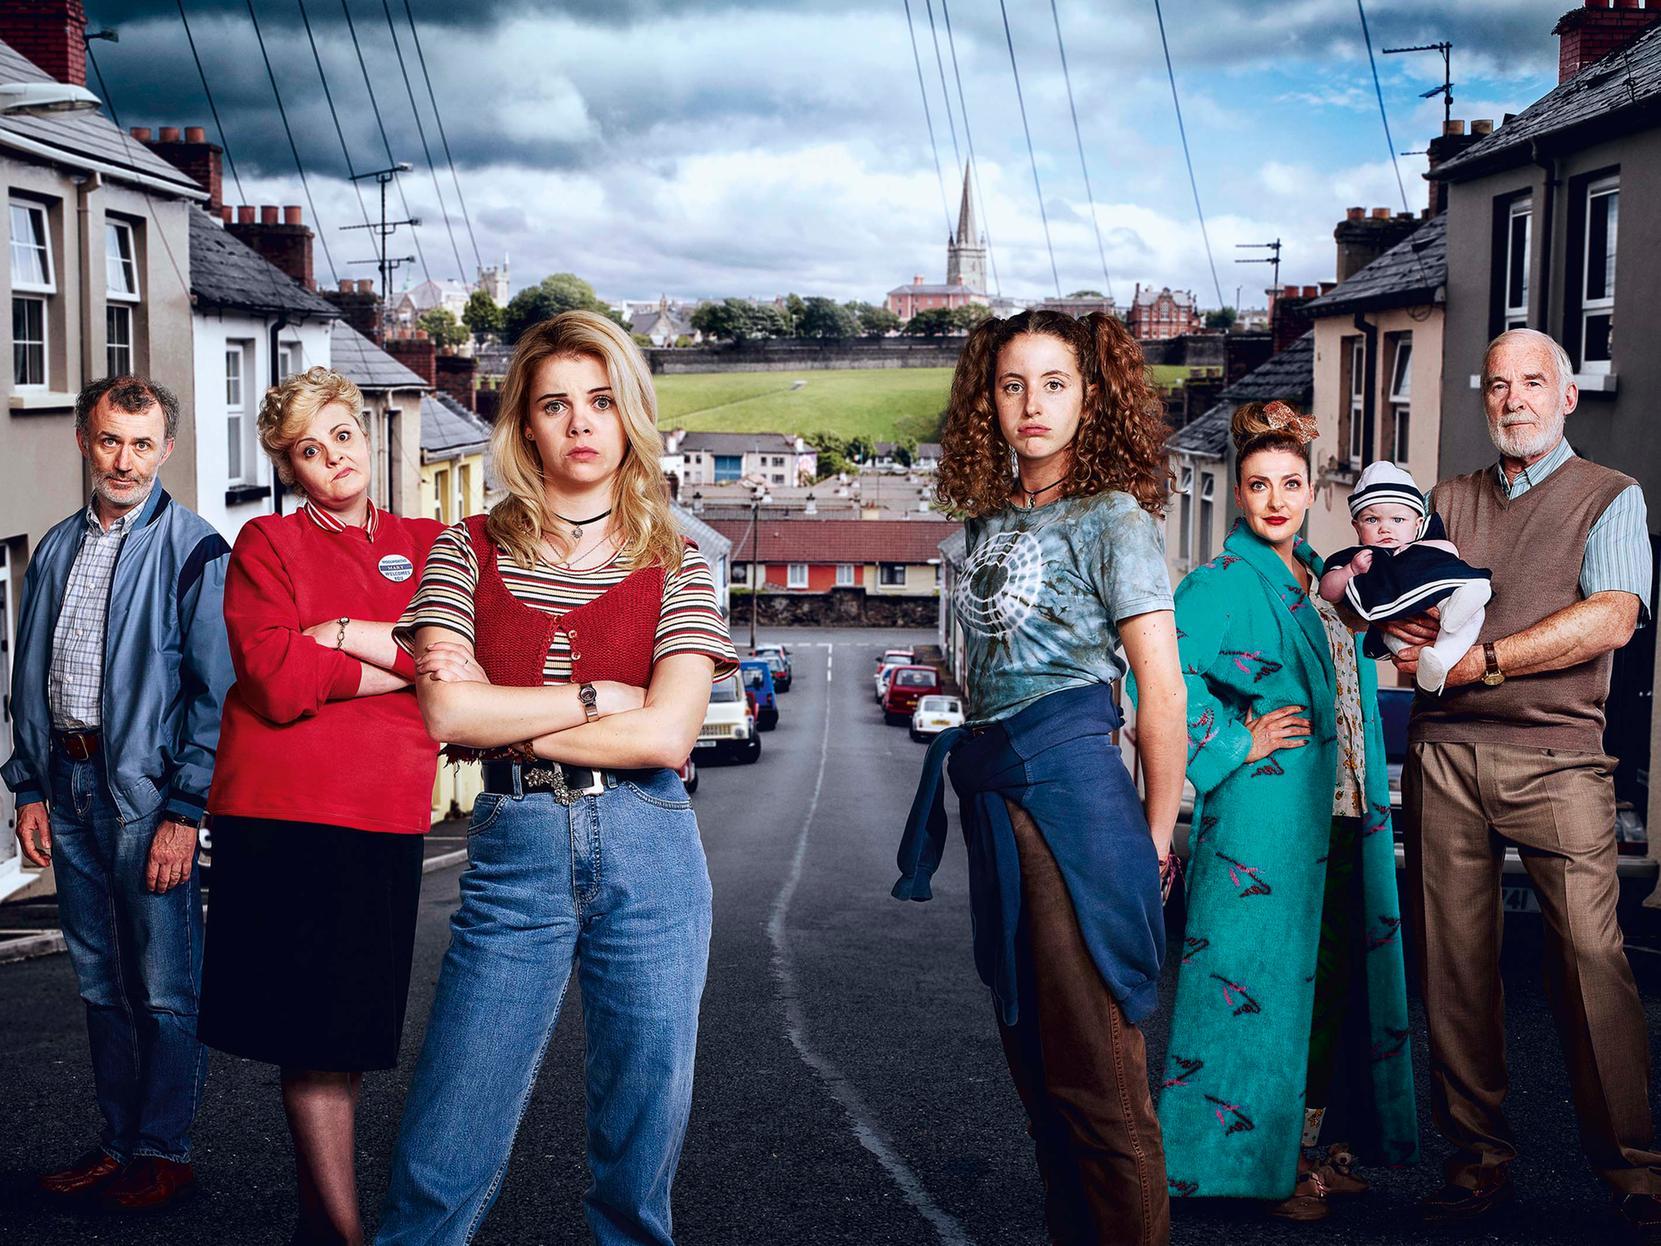 This is how we think some of the main characters from Derry Girls would have voted in the 2016 EU Brexit referendum.